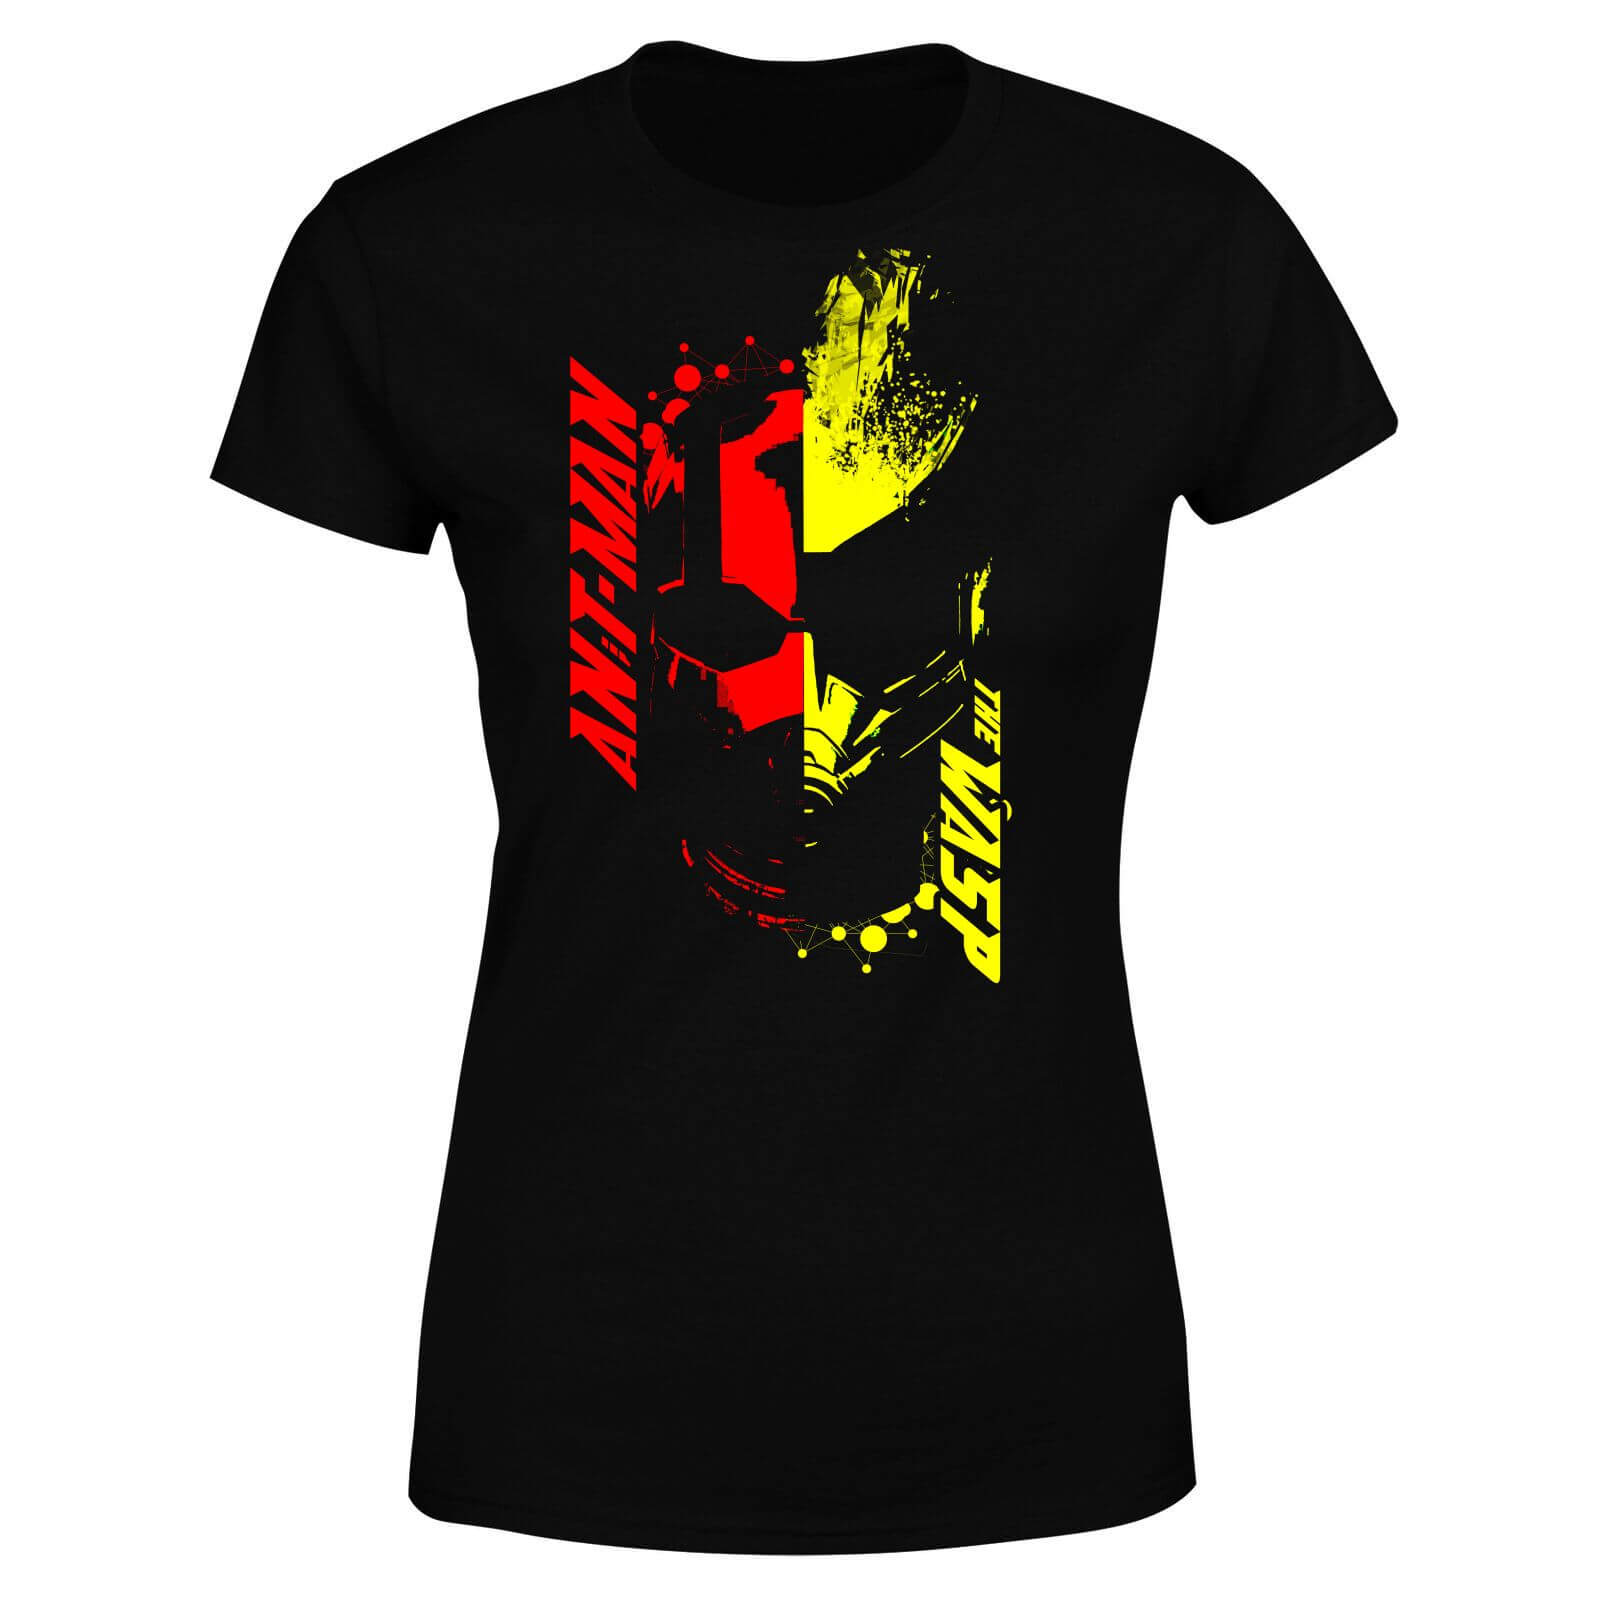 Ant-Man And The Wasp Split Face Women's T-Shirt - Black - Xl